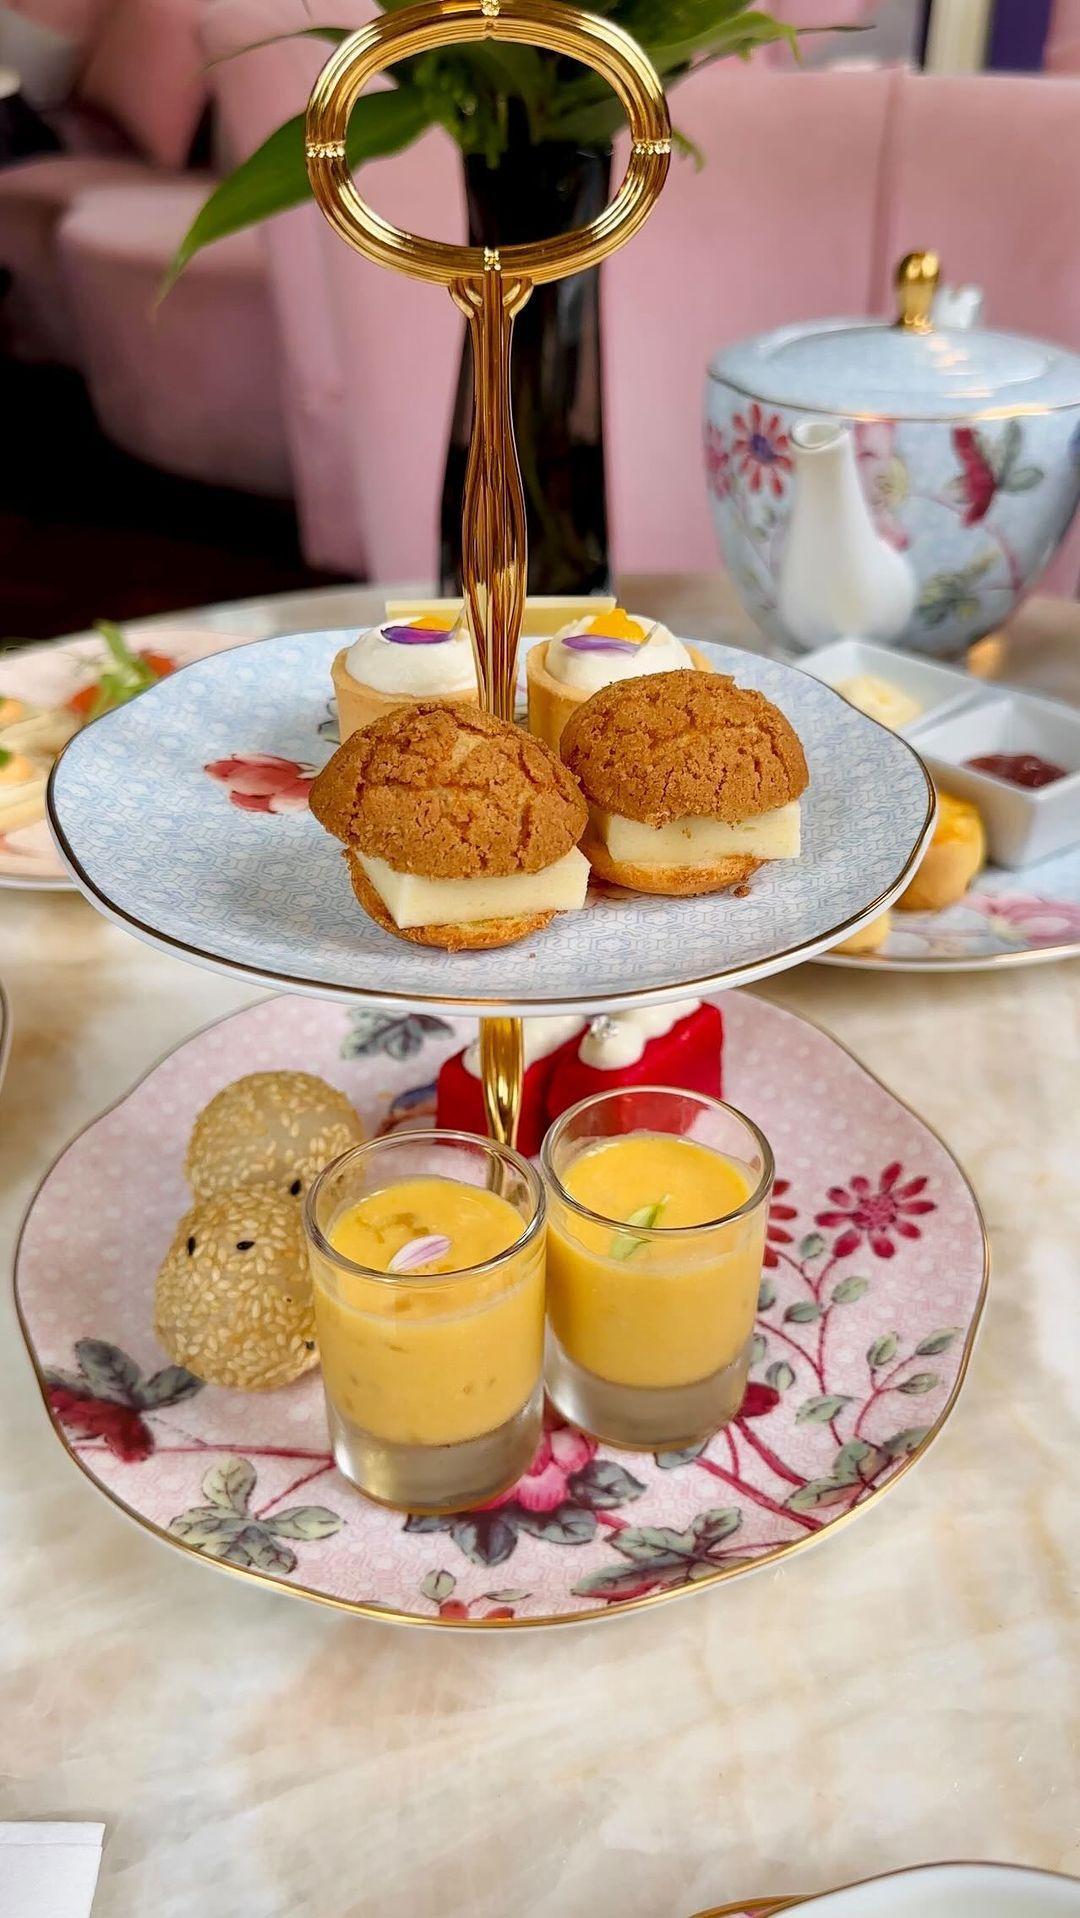 Pov: you’re having a Chinese New Year-themed afternoon tea 🫖

To celebrate CNY, @madamefugrandcafe with @wedgwoodhongkong are serving a British afternoon tea featuring a modern take on traditional Hong Kong desserts, including:
🍞 pineapple bun - a sweet bun infused with lemongrass and pineapple mousse
🍡 sesame balls - a lightly fried and chewy glutinous rice exterior filled with purple sweet potato 
🥭 mango sago pomelo - a juicy, refreshing dessert with fresh mango and pomelo

📍 @madamefugrandcafe, Central, Hong Kong

#hongkong #chinesenewyear #madamefu